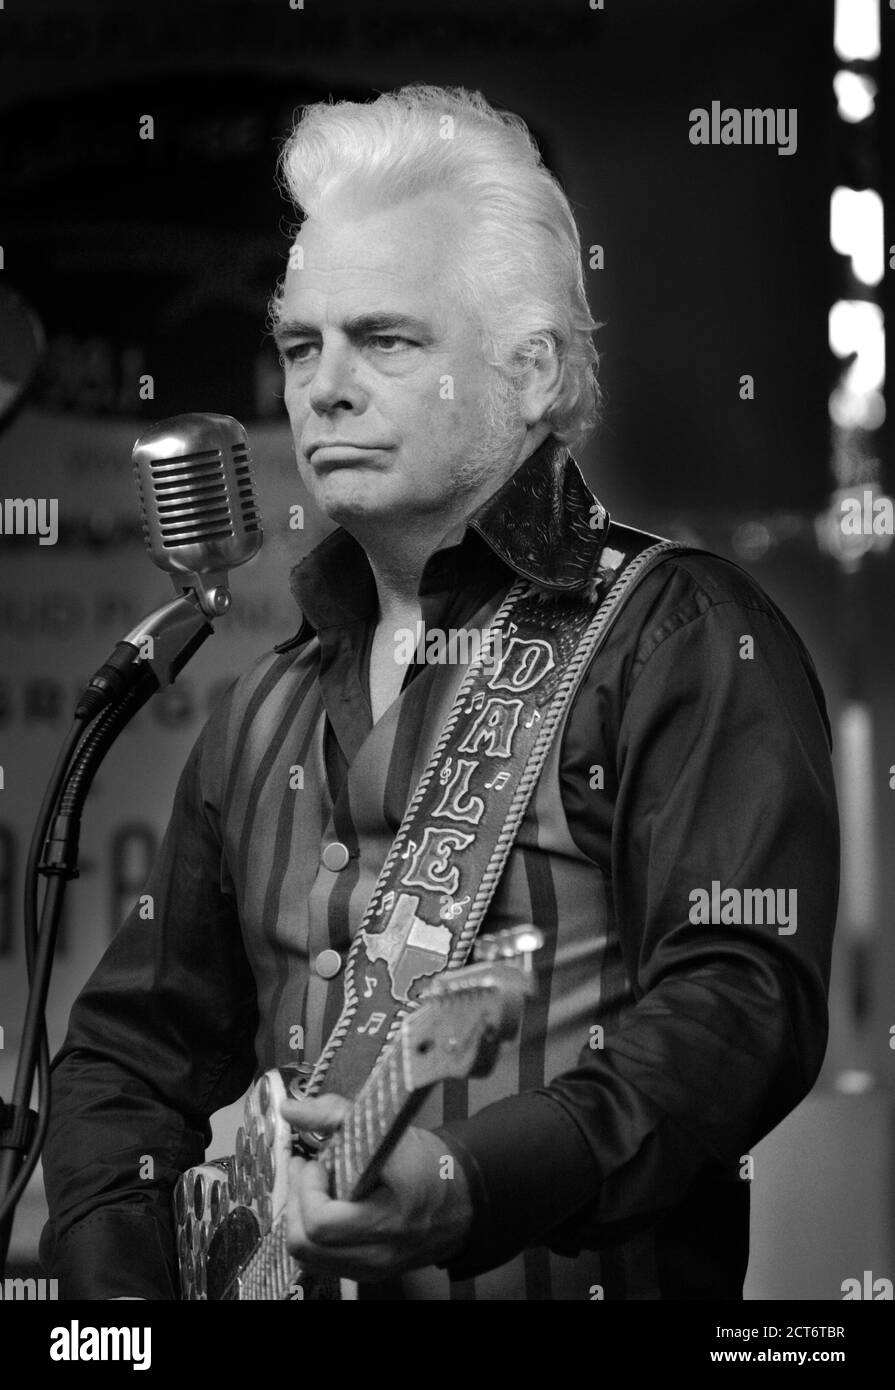 Dale Watson, an American countr /Texas country singer, guitarist and songwriter, performs in Santa Fe, New Mexico. Stock Photo